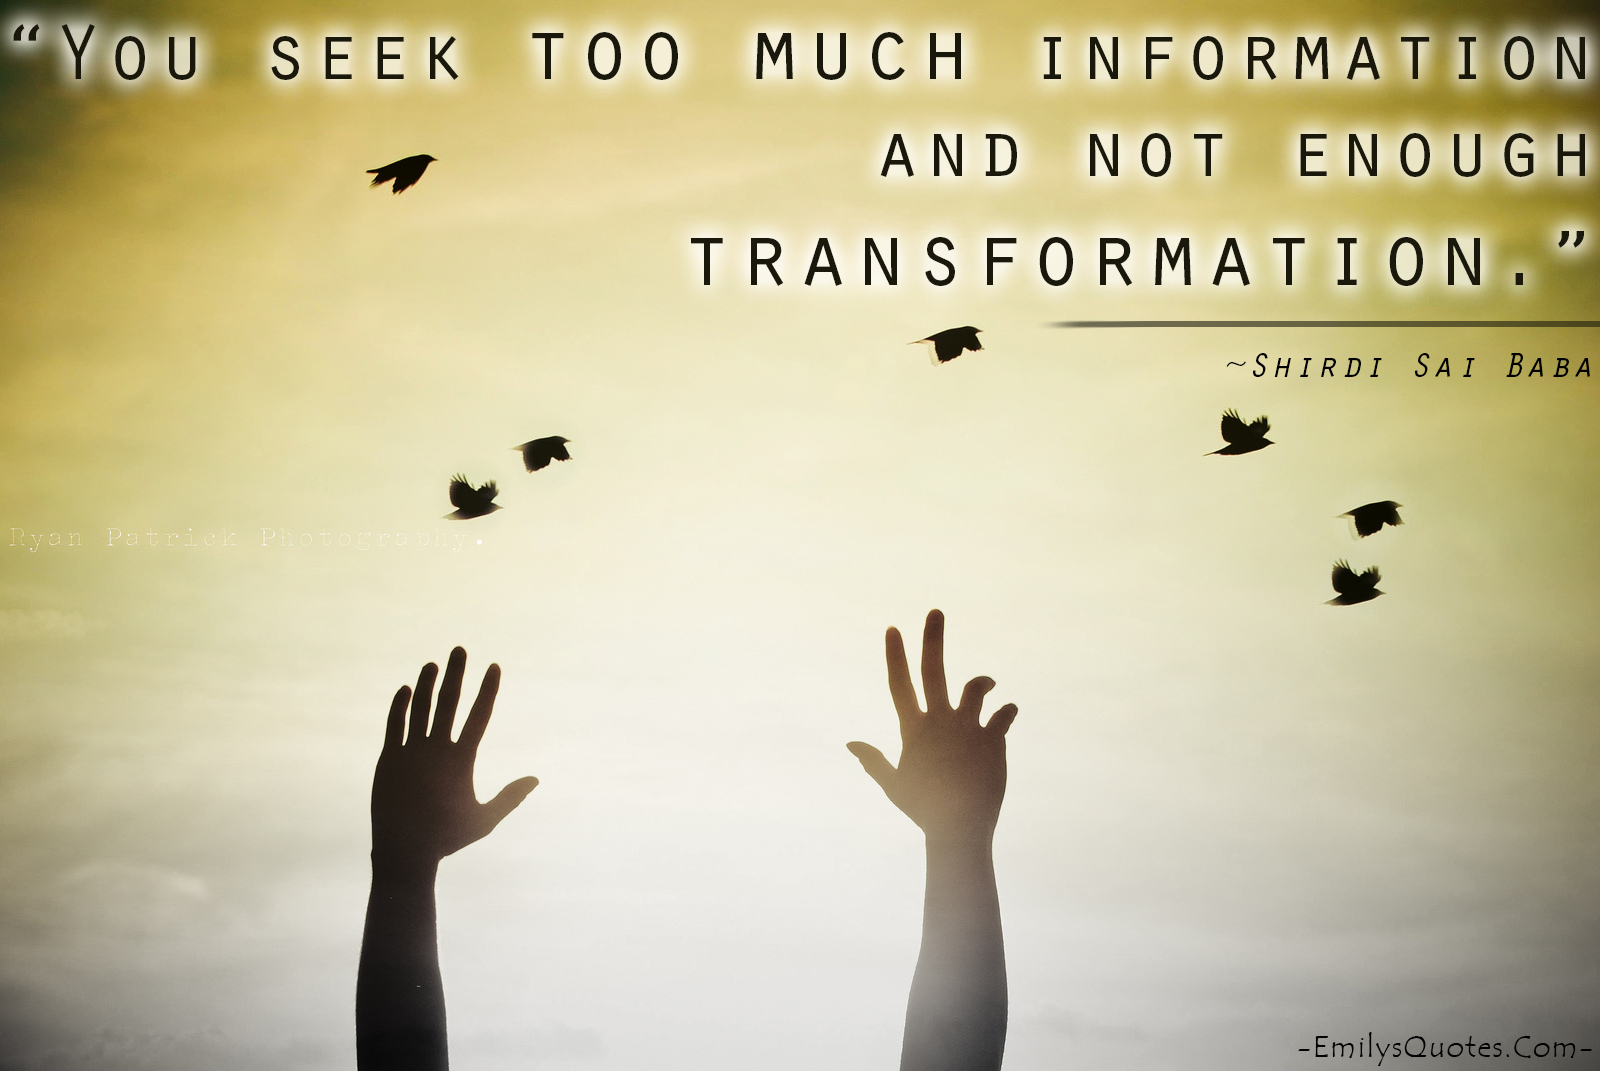 You seek too much information and not enough transformation